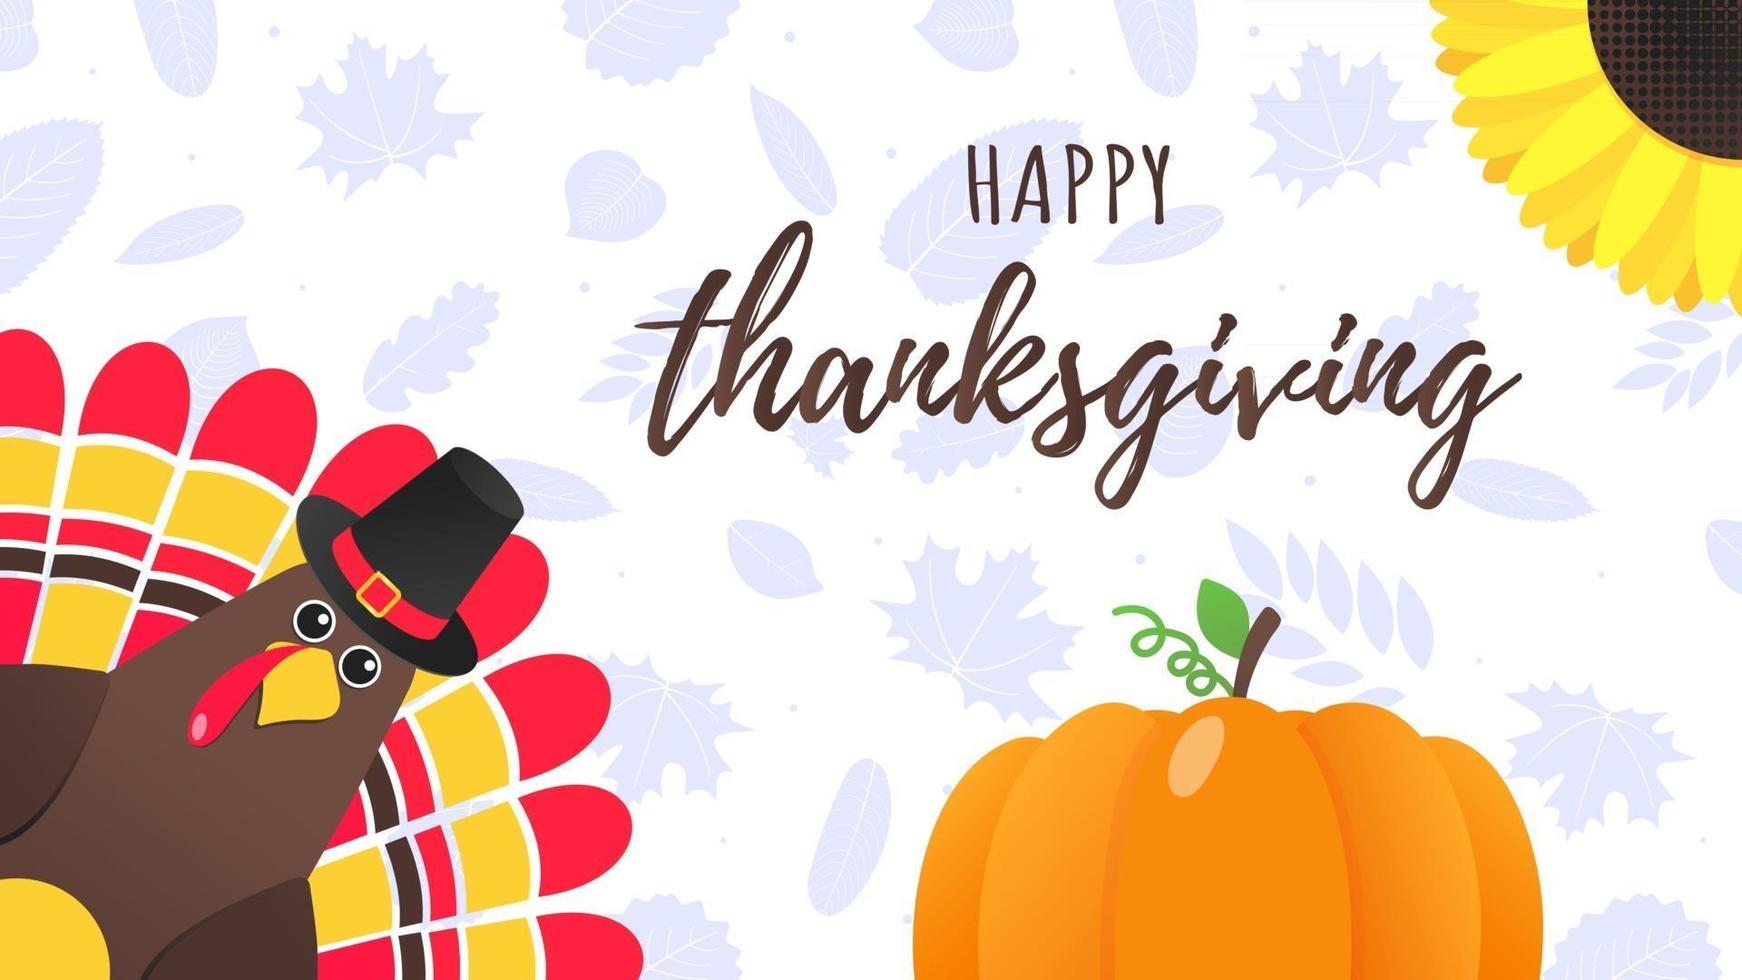 Happy thanksgiving day flat style design poster vector illustration ...